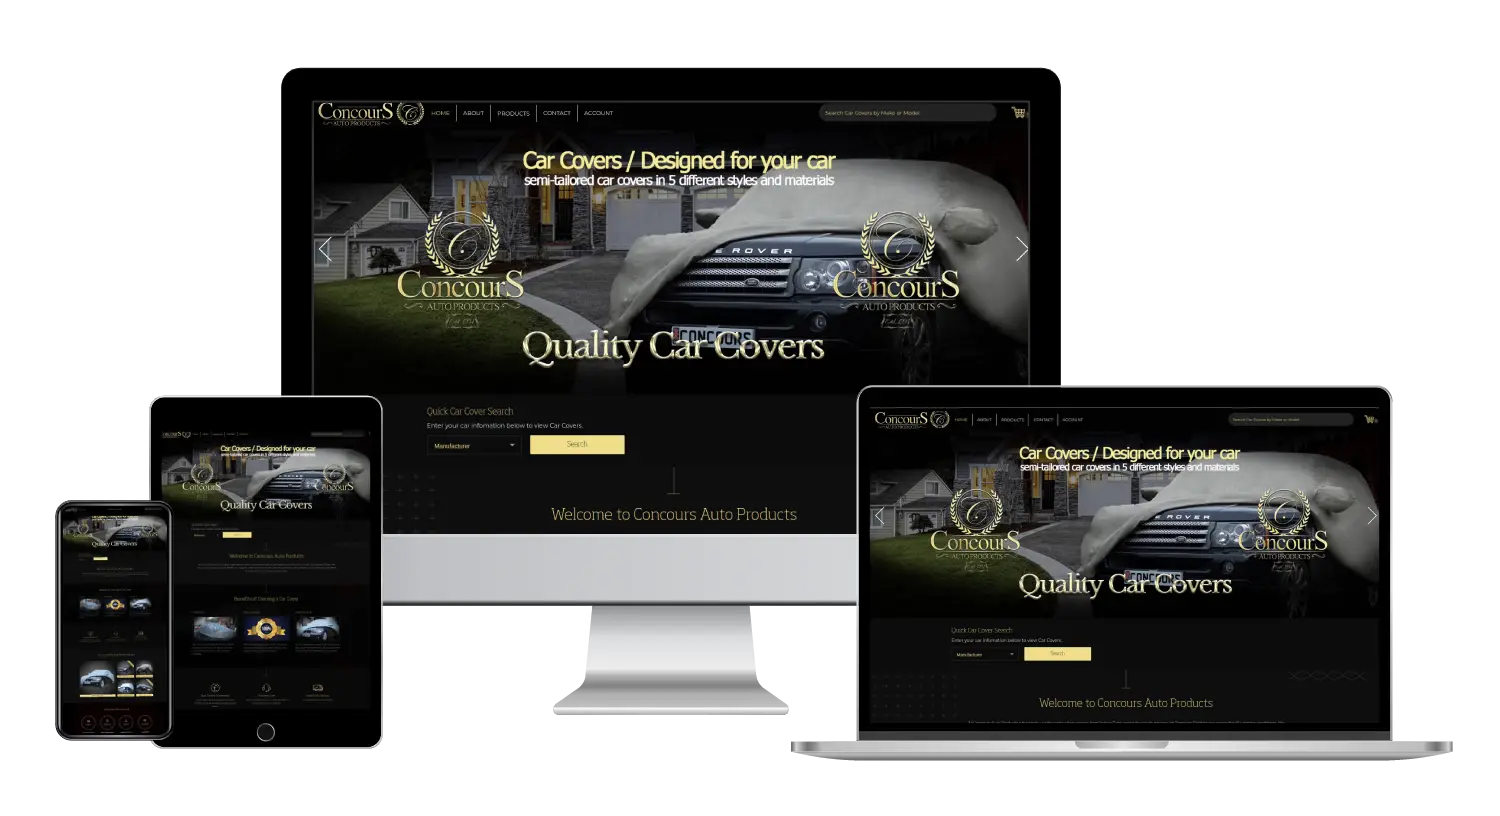 ConcourS - website that provides car covers